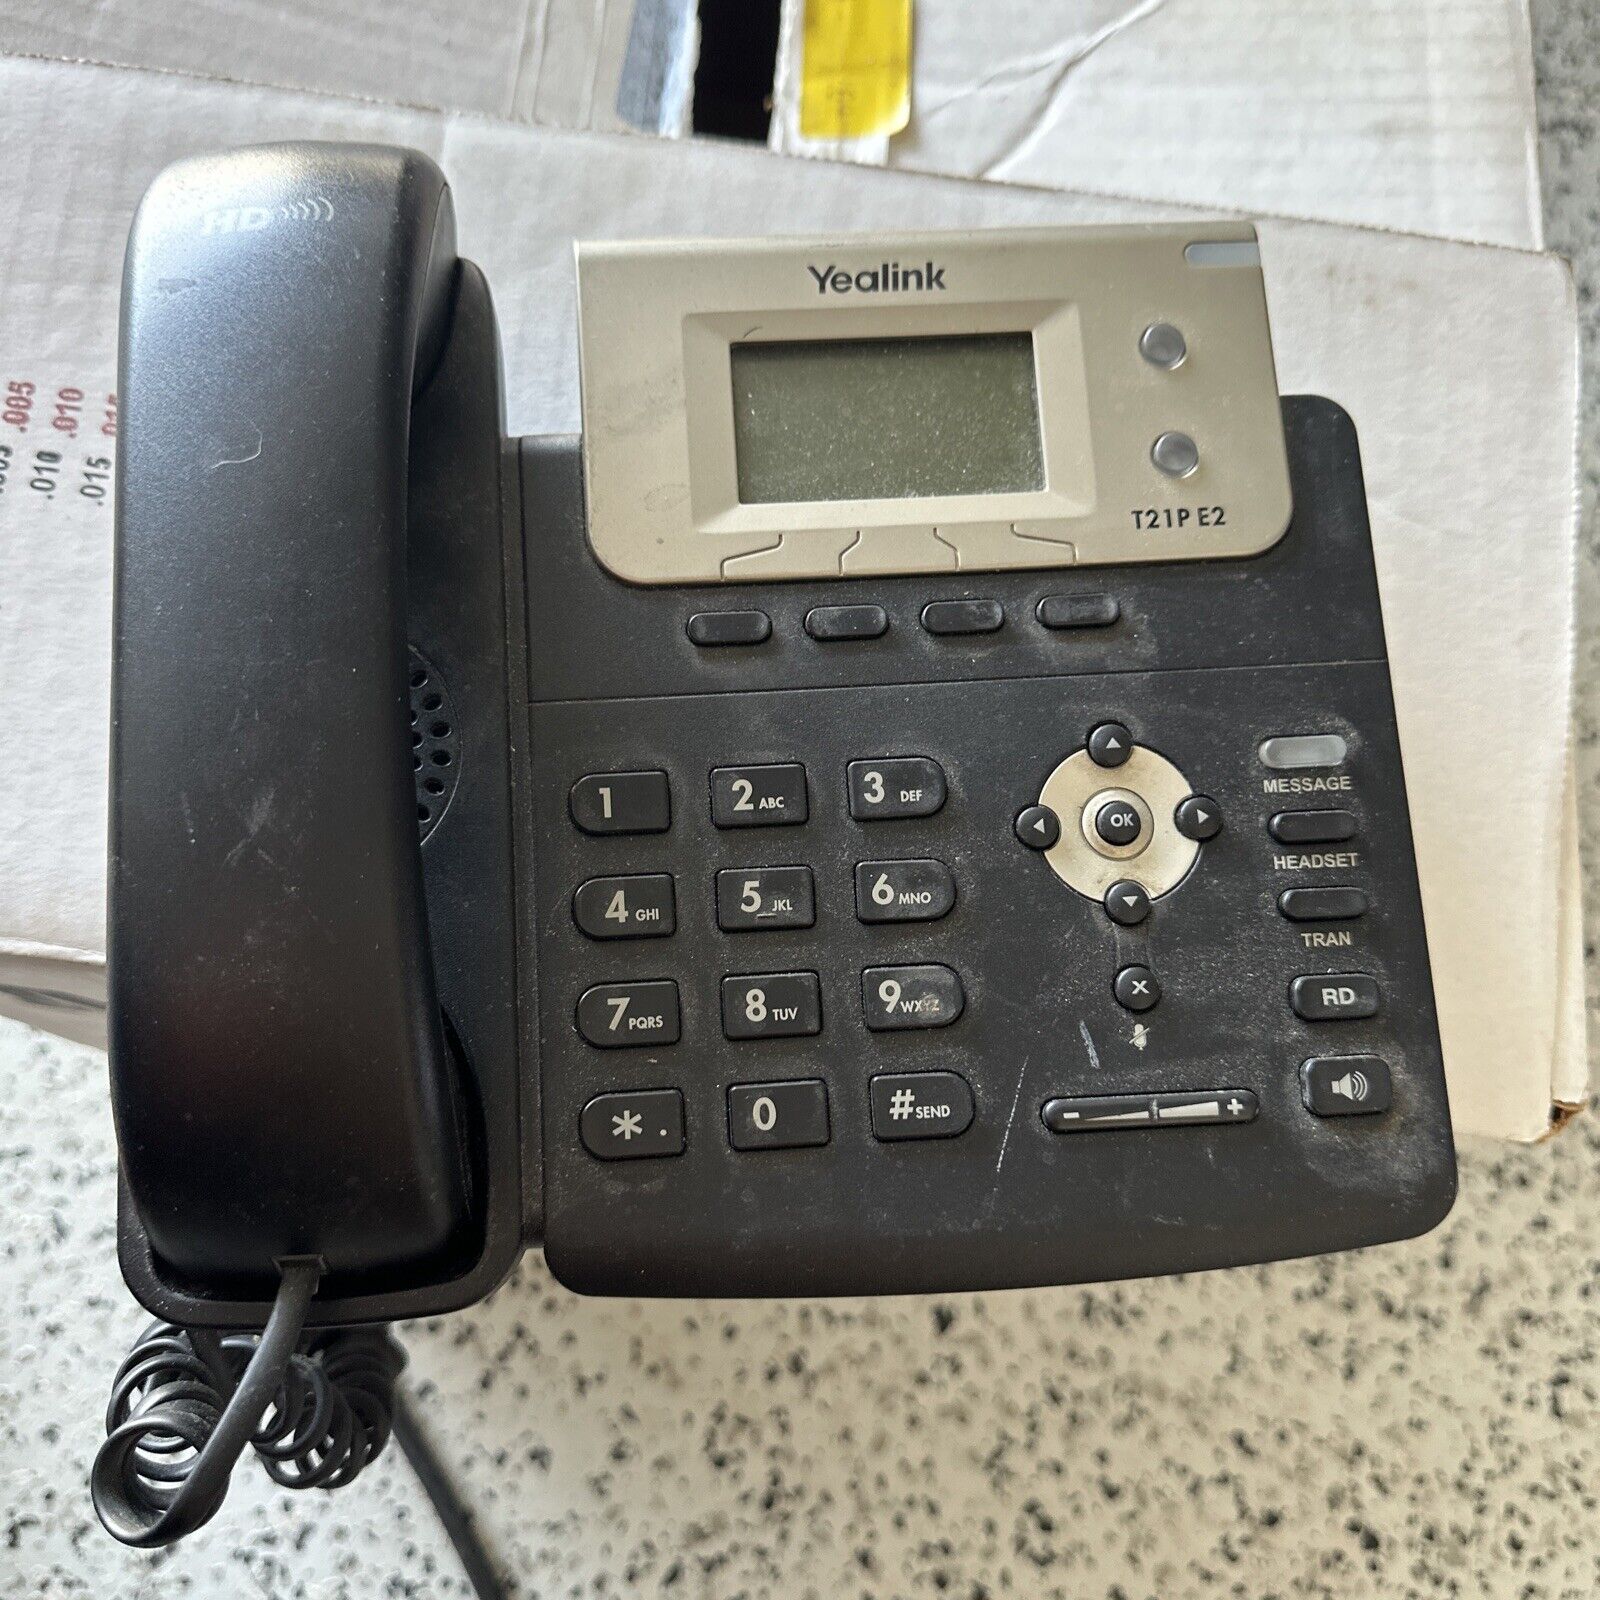 Yealink SIP-T21P E2  Dual-line Entry Level IP Phone